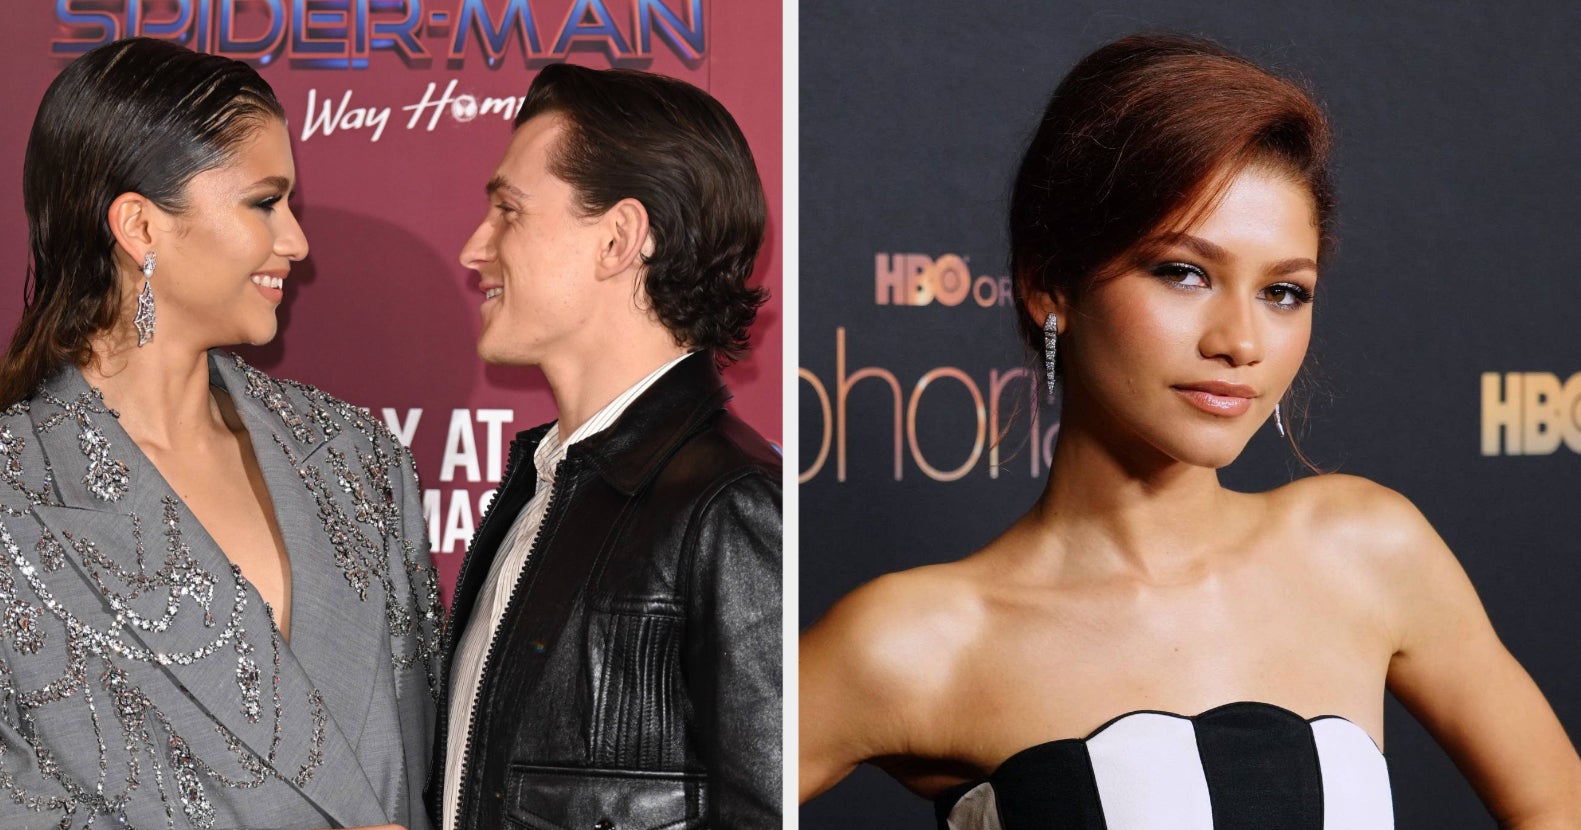 Tom Holland Reportedly Flew to Italy to 'Surprise' Zendaya With a